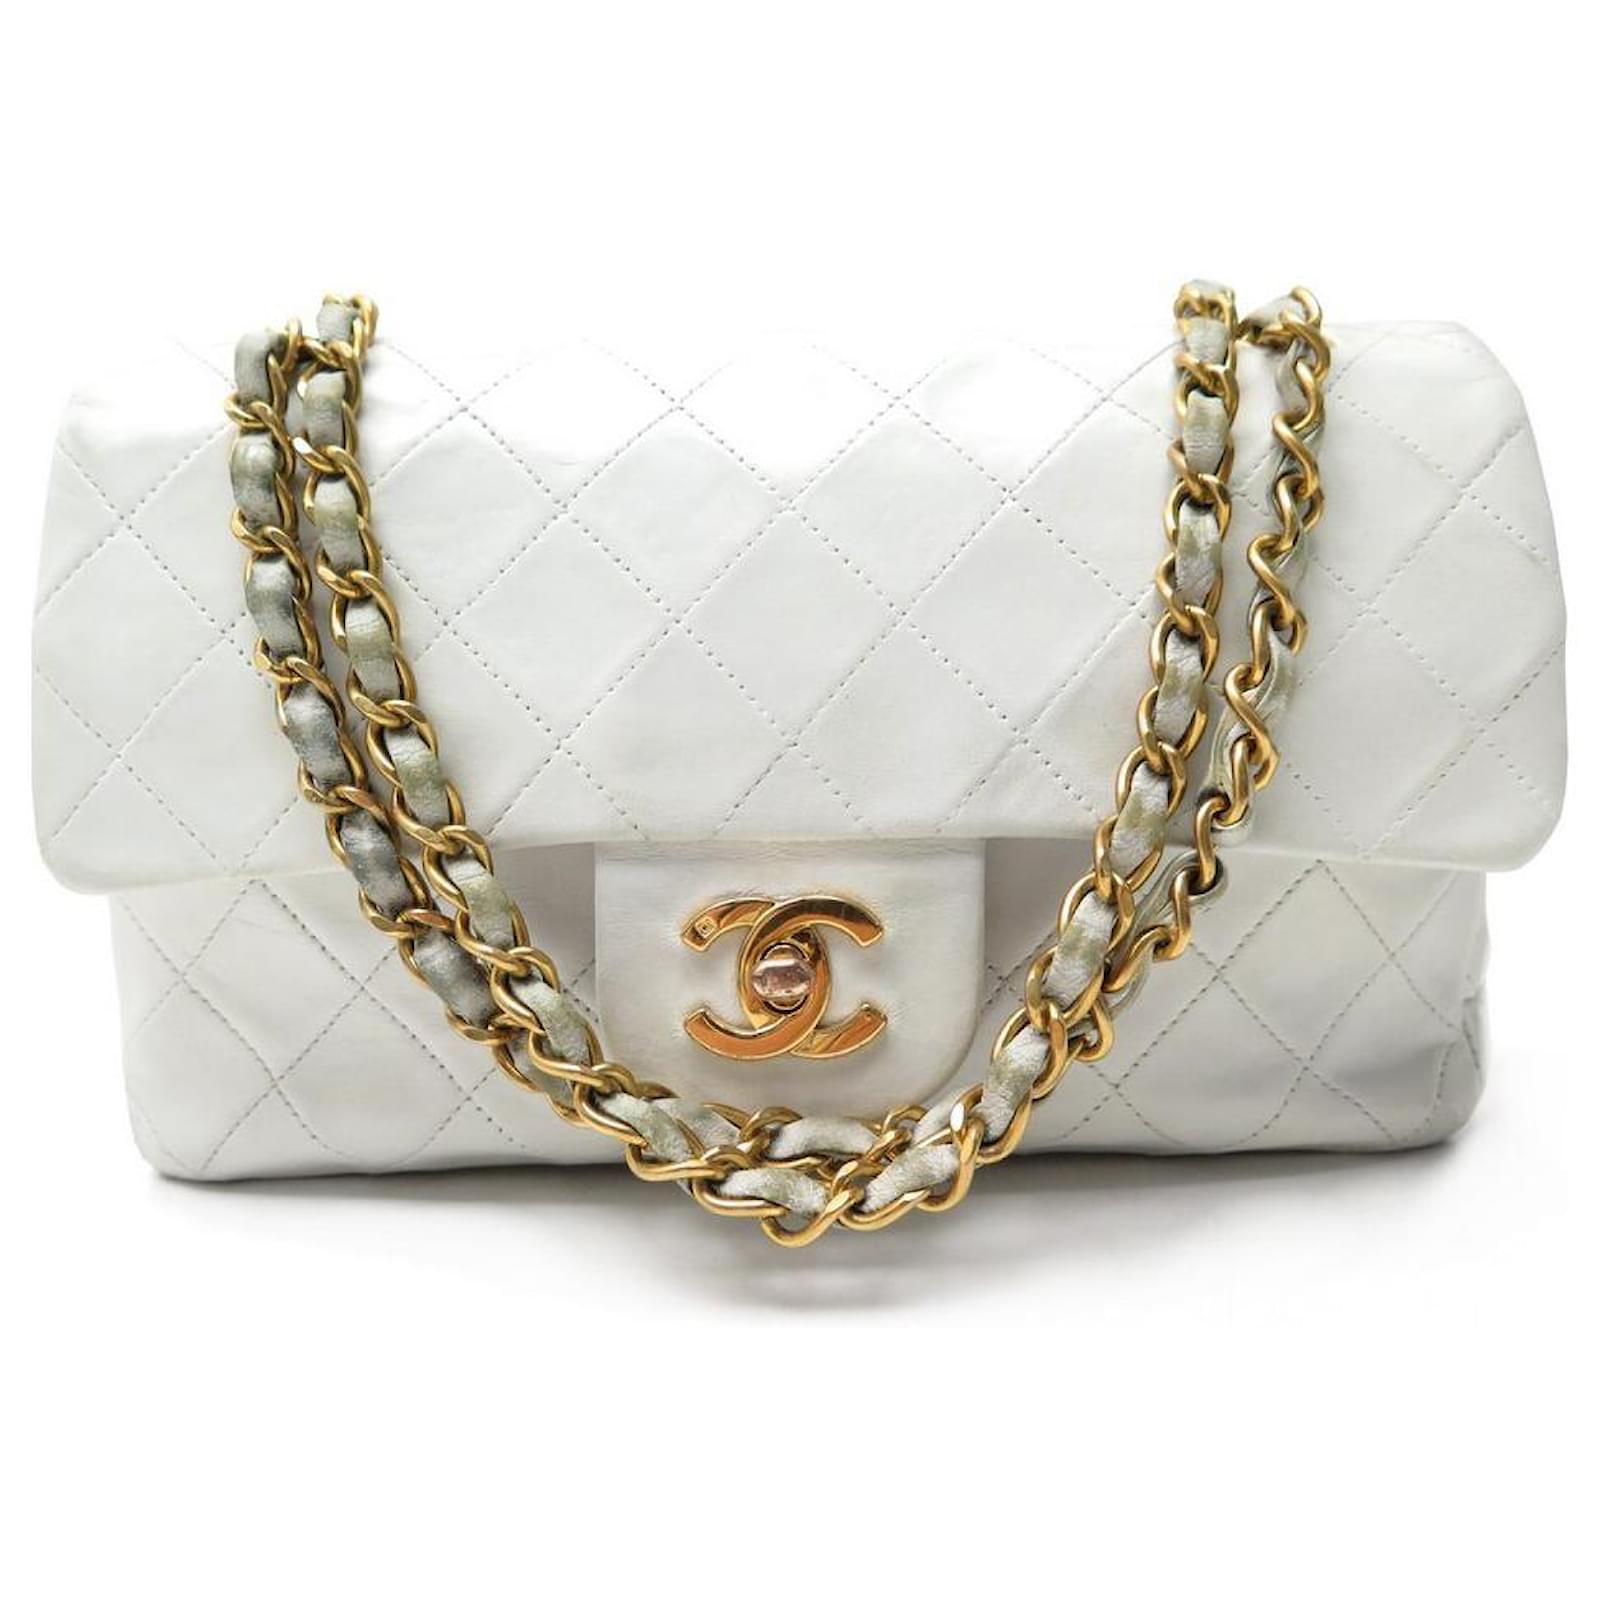 VINTAGE CHANEL CLASSIC TIMELESS PM HANDBAG IN QUILTED LEATHER HANDBAG White  ref.501070 - Joli Closet